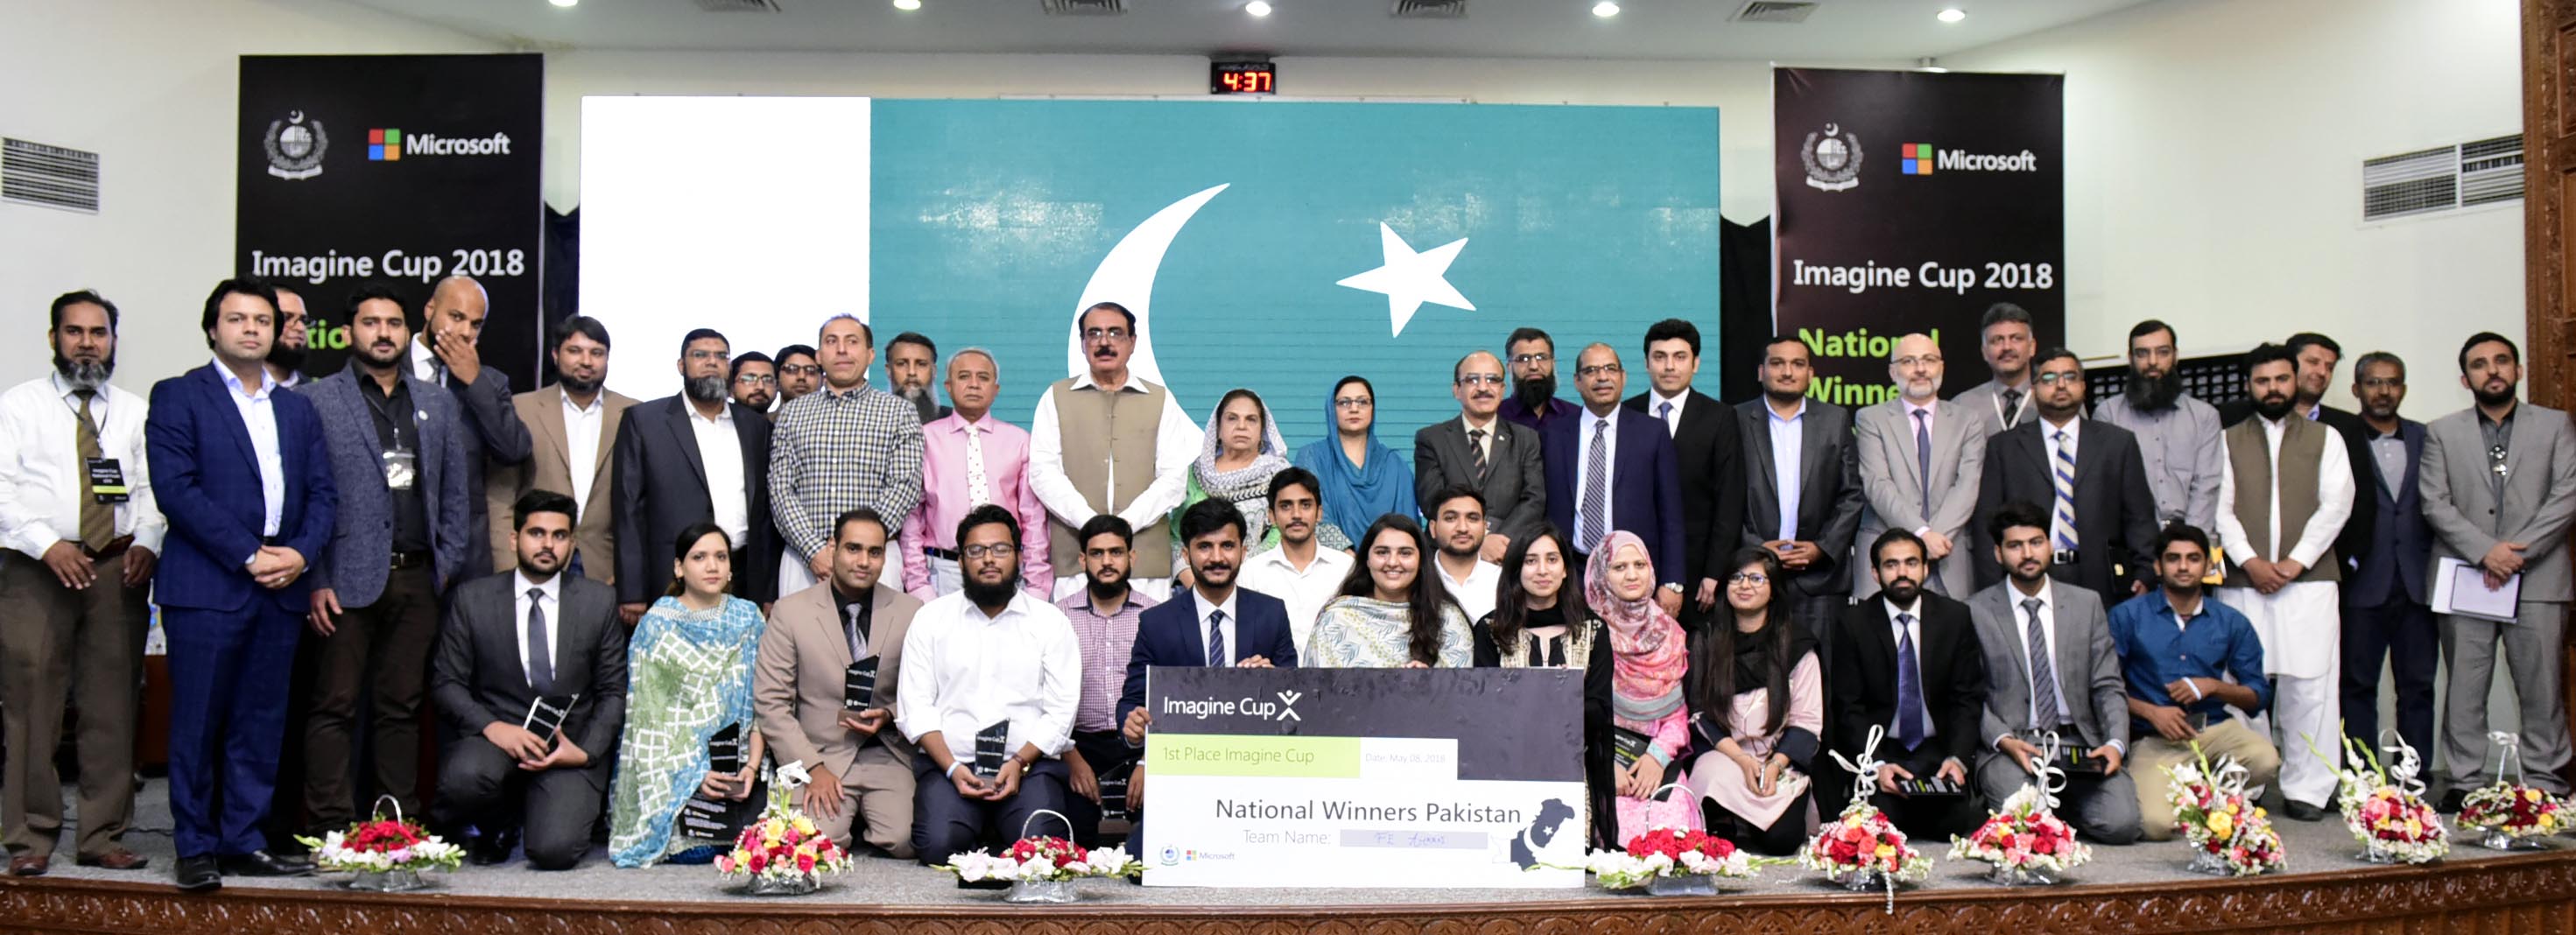 HIGHER EDUCATION COMMISSION AND MICROSOFT PAKISTAN ANNOUNCE THE ‘IMAGINE CUP’ WINNERS FROM PAKISTAN TO COMPETE IN GLOBAL COMPETITION 2018 IN SEATTLE